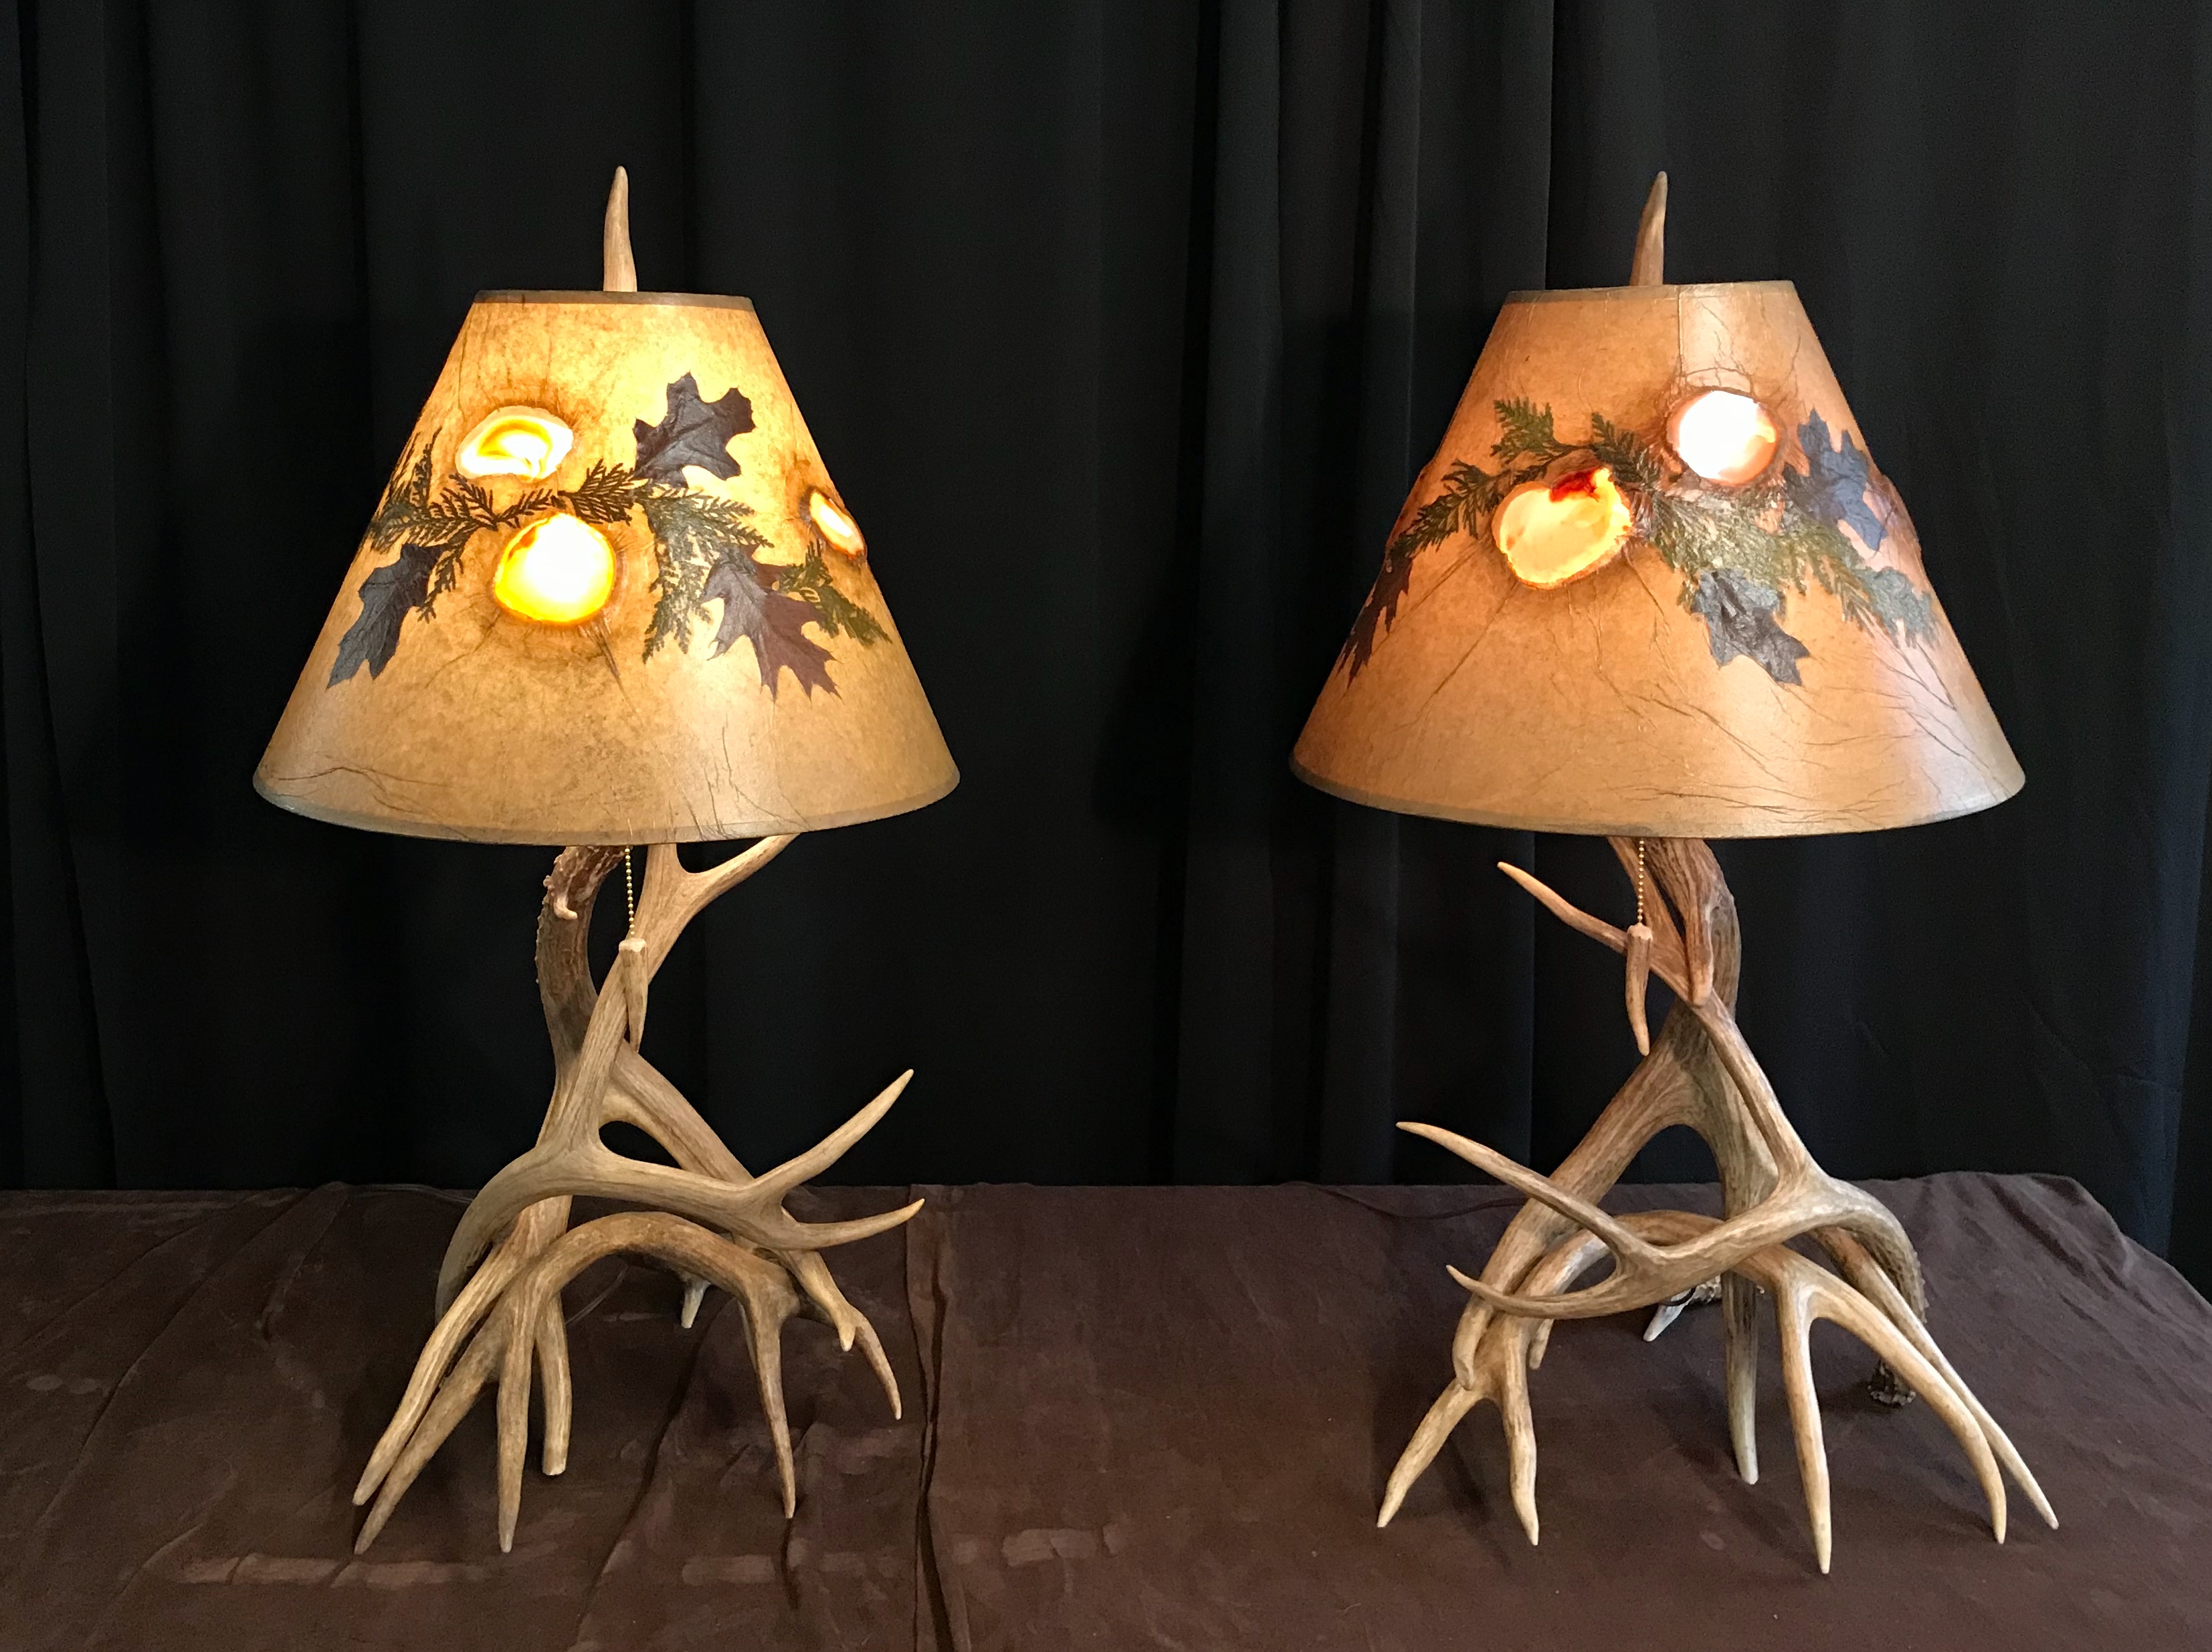 Real Deer Antler Table Lamp Set with Agate Shade - Mad River Antler